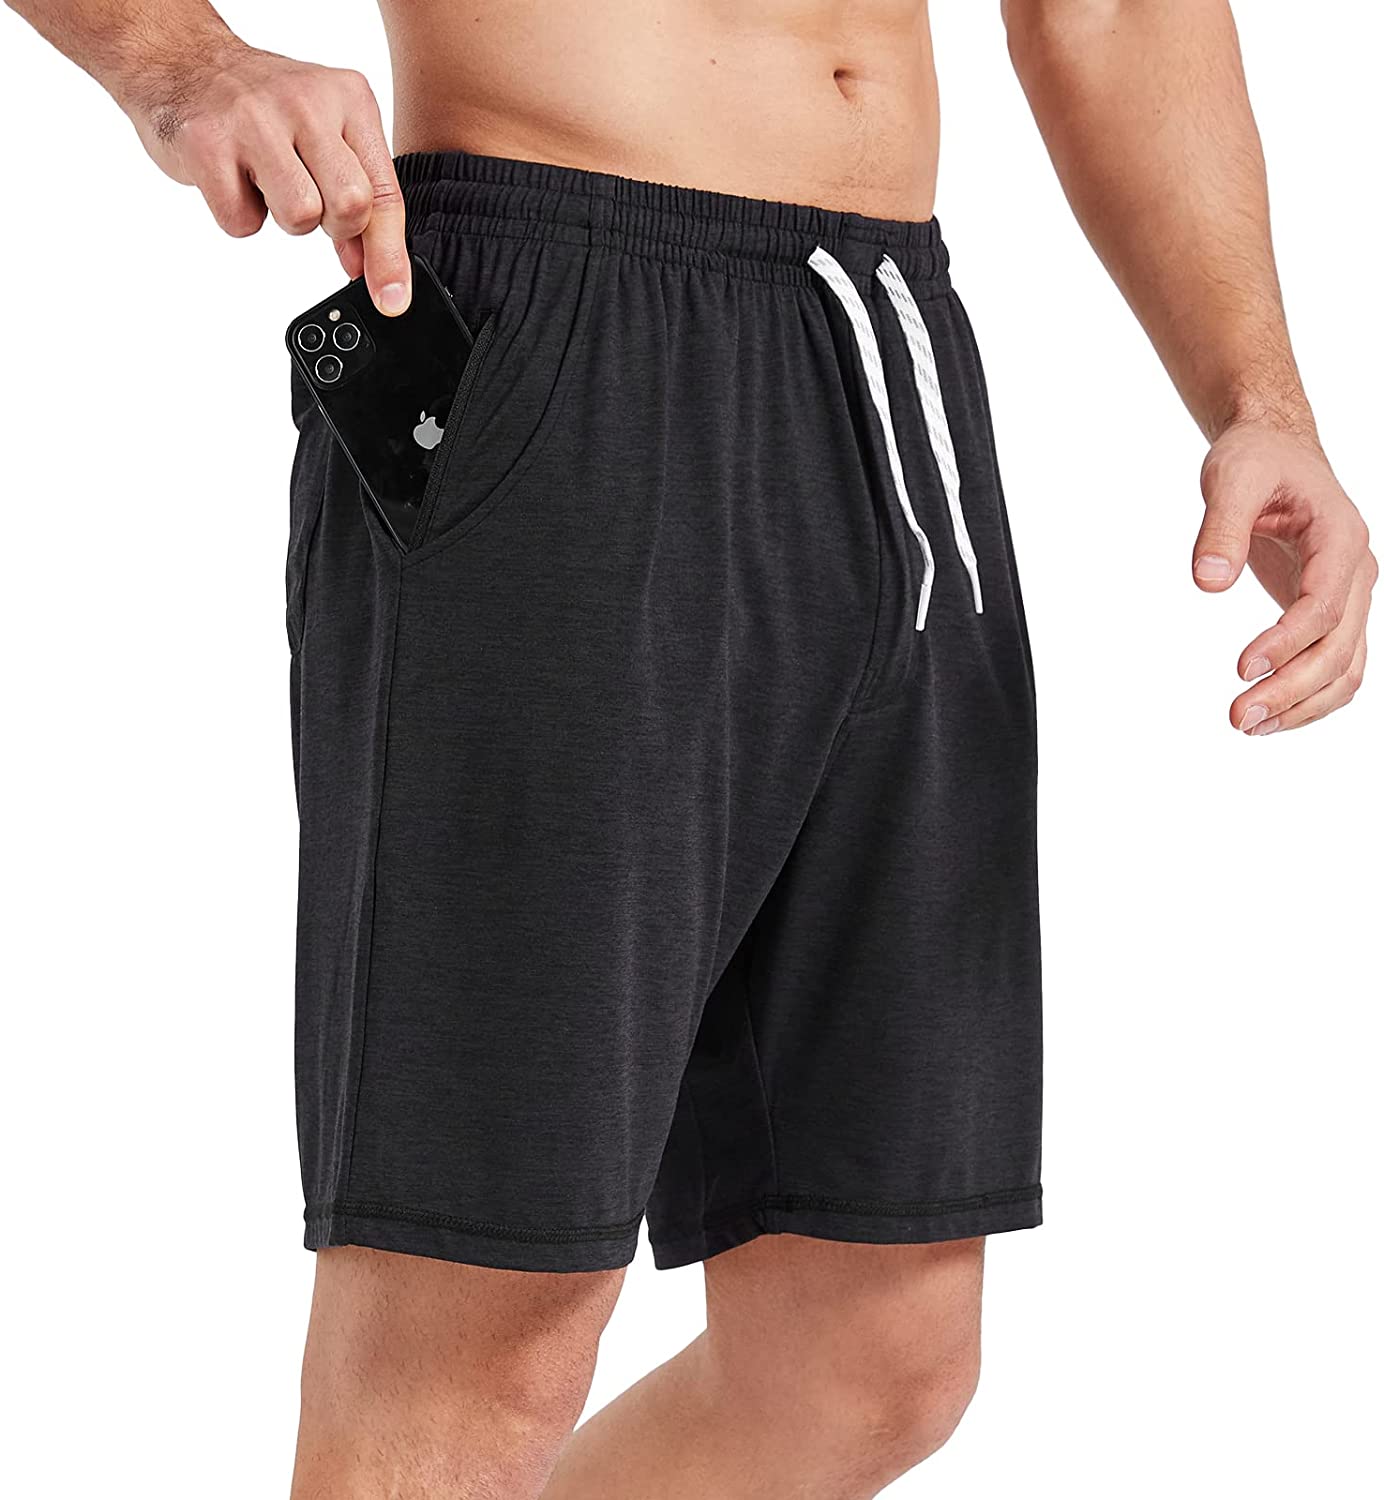 TBMPOY Men's 7'' Athletic Running Shorts Quick Dry Shorts with Zipper Pockets 